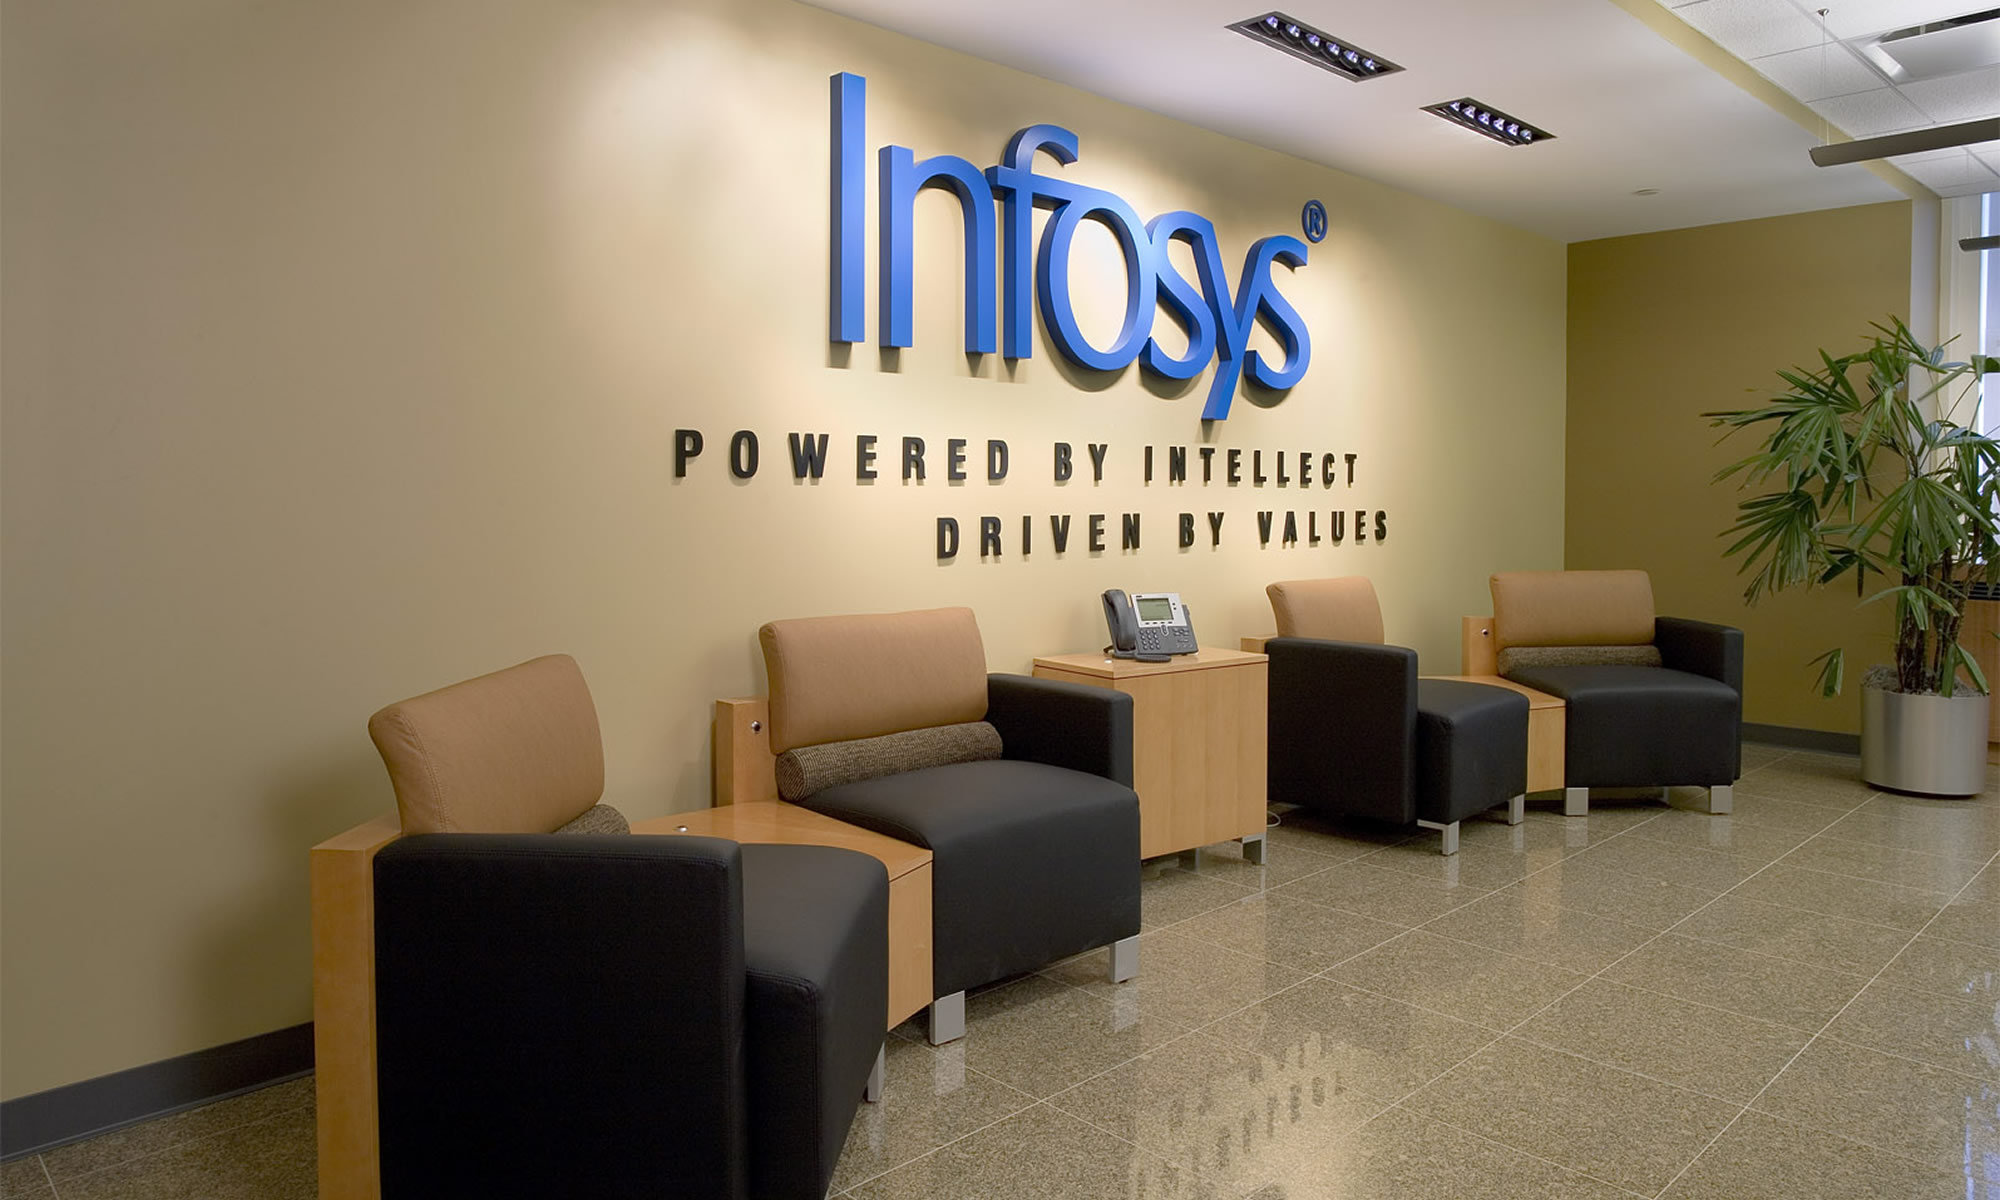 Infosys Sued In US,US For Discrimination,Plaintiff, US District Court,Infosys ongoing litigation,international news